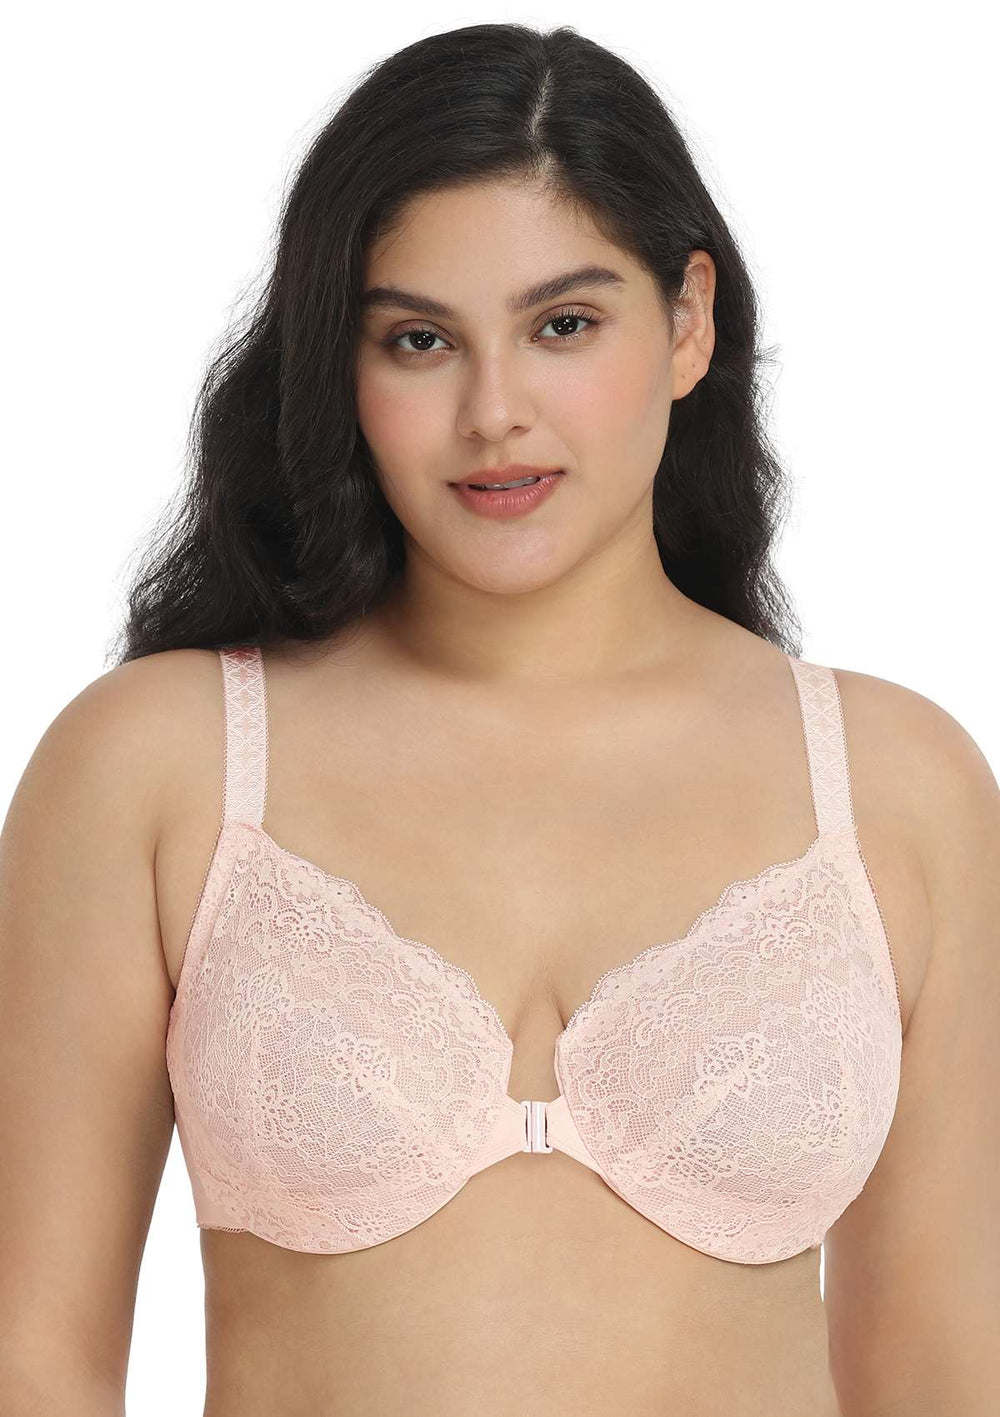  Womens Front Closure Bras Plus Size Lace Full Coverage  Underwire Unlined Bra Beige 48C